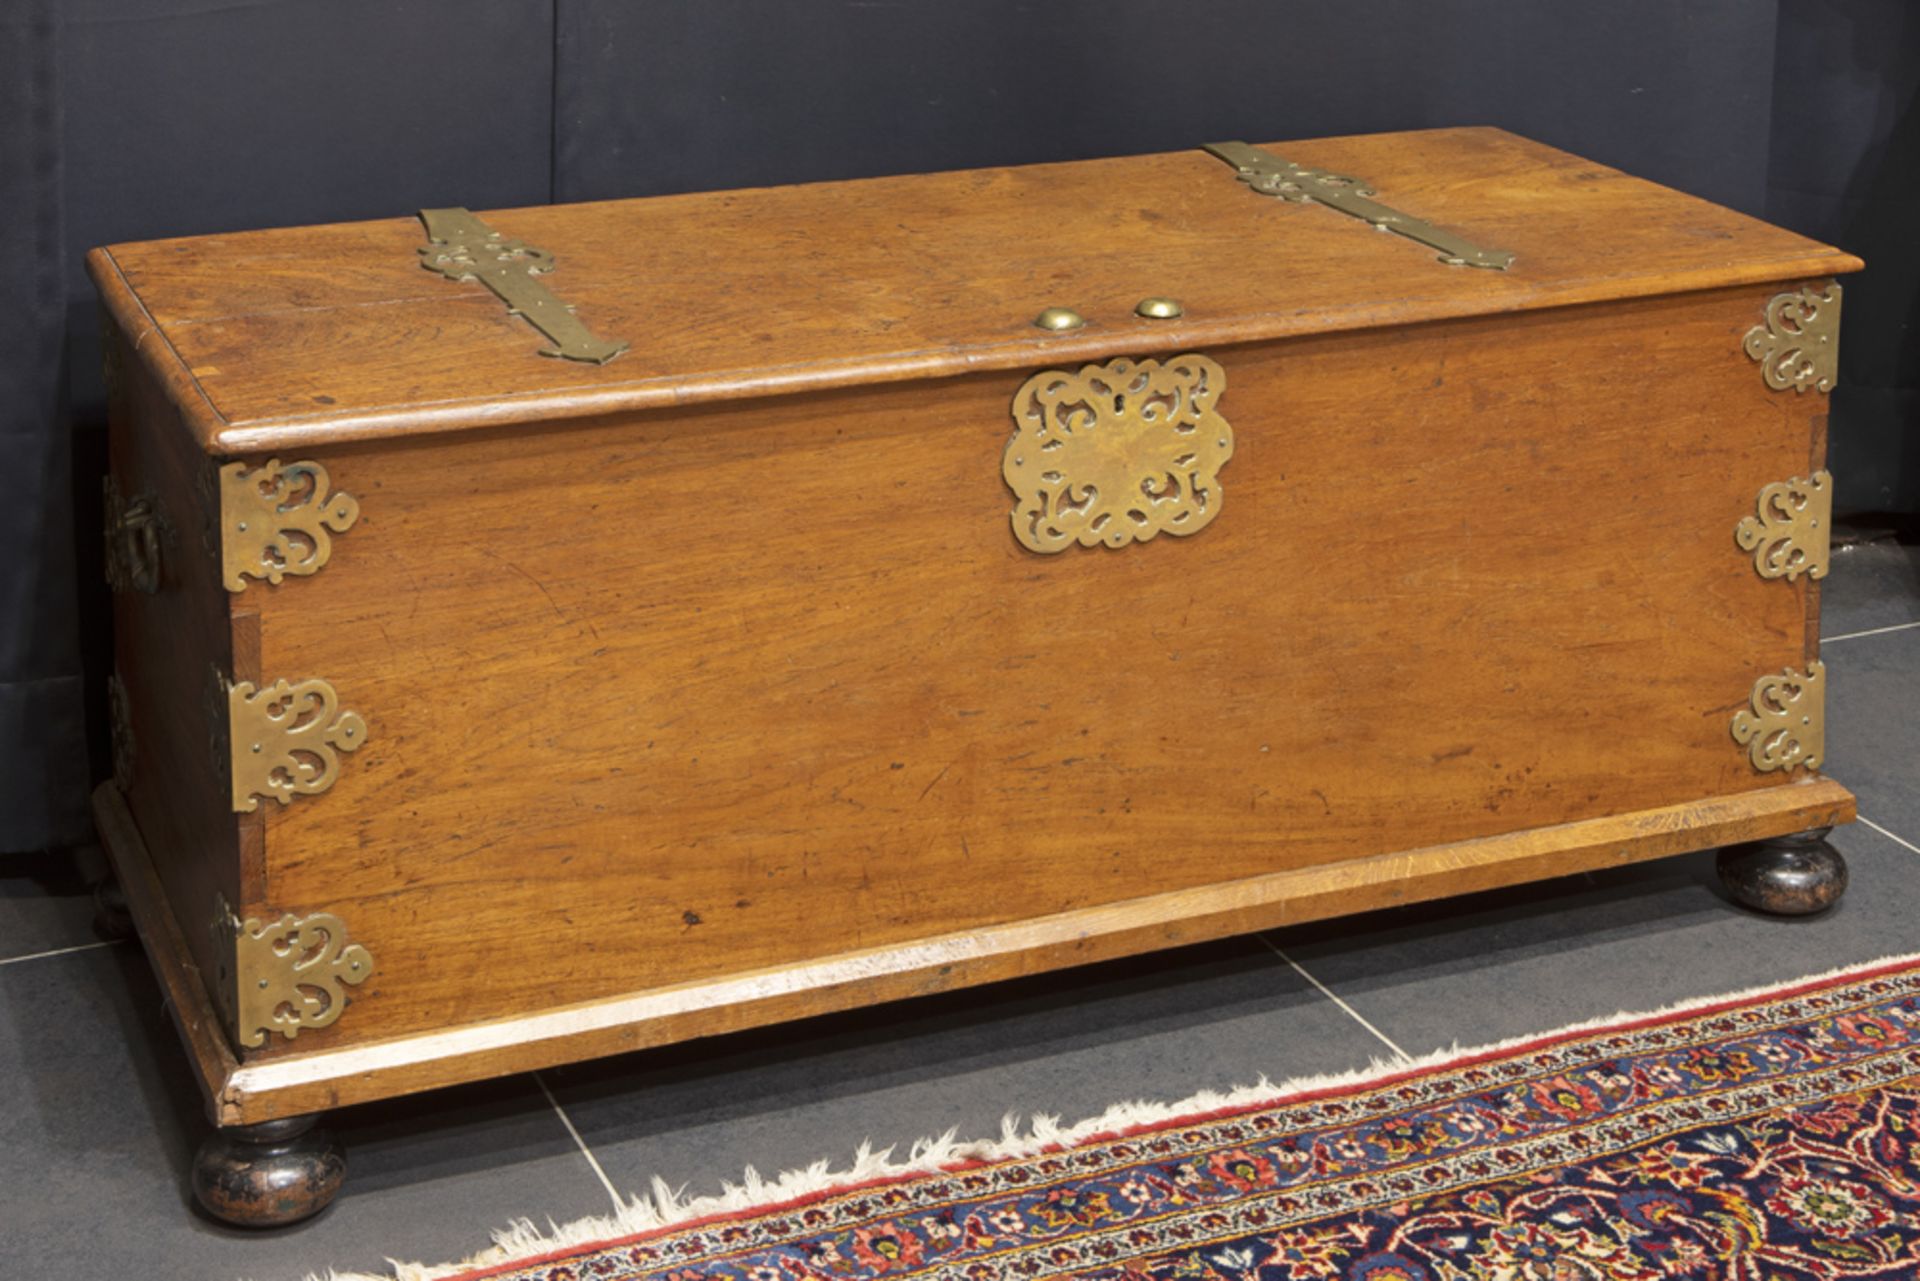 18th Cent. so-called "VOC" chest in an exotic type of wood with nice brass fittings || Achttiende